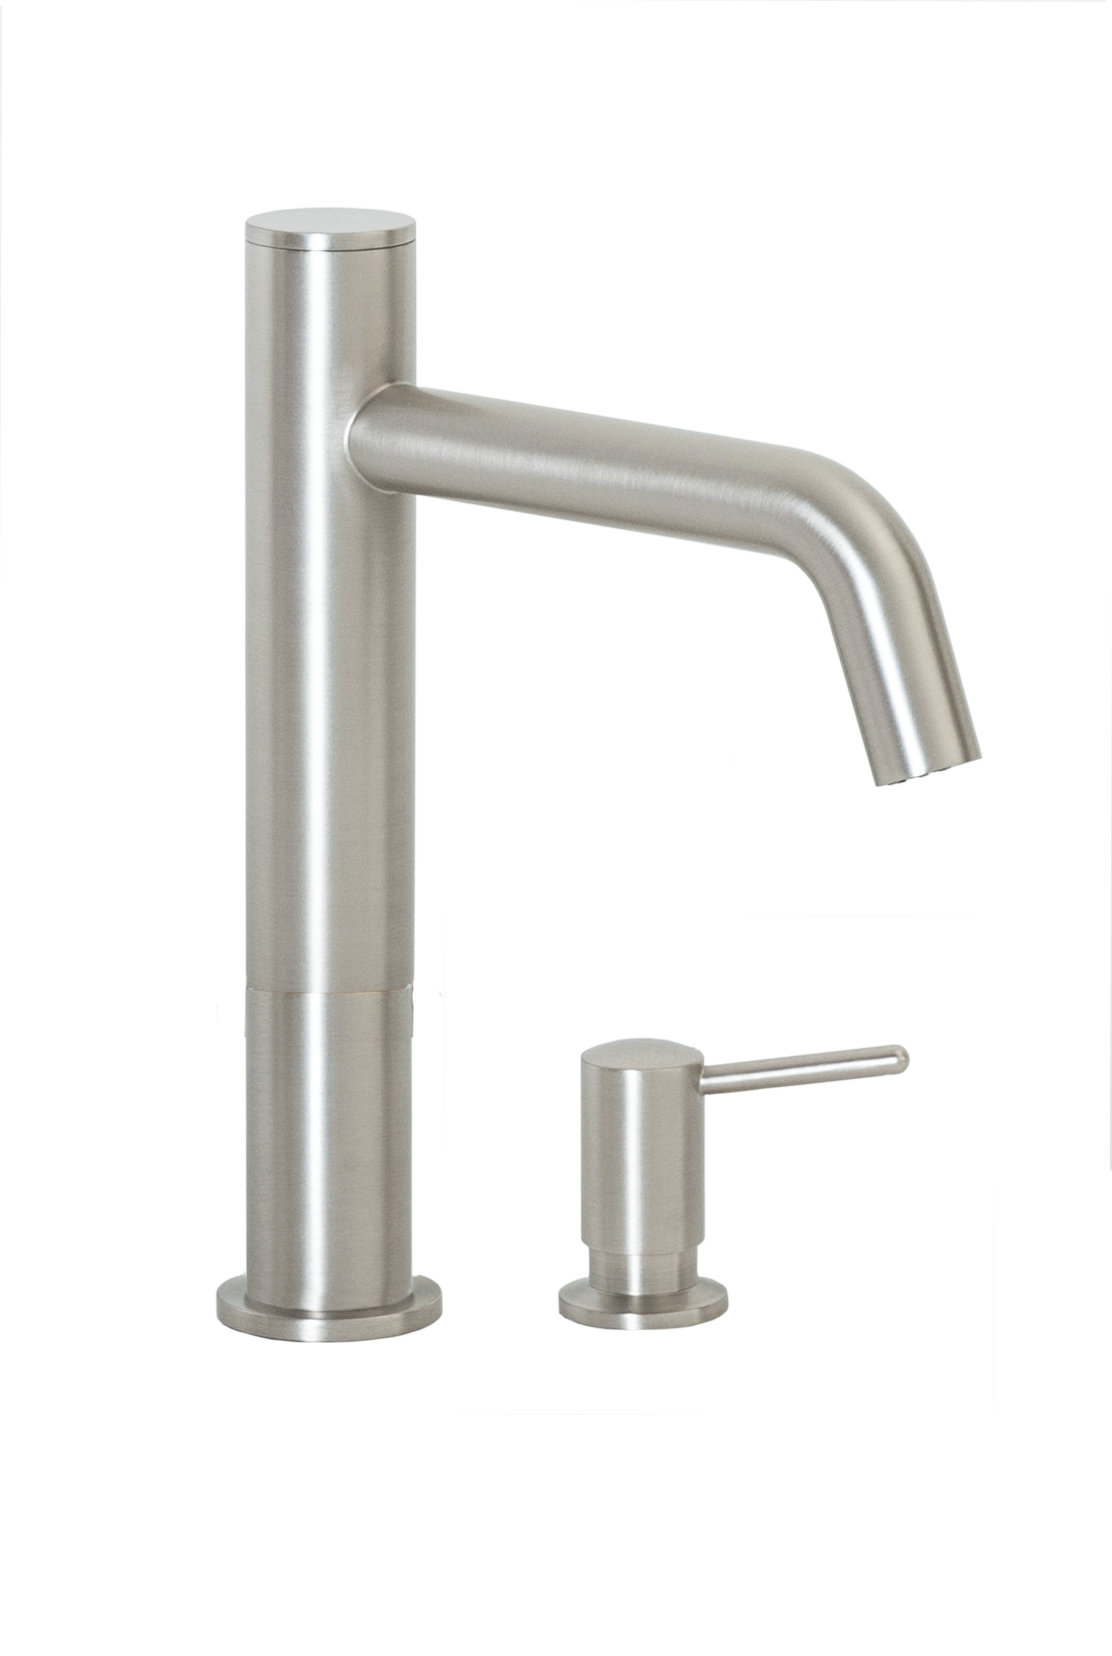 FA-3283S Automatic Faucet with 8” Spout Reach, 3” Riser and Manual Soap Dispenser In Satin Nickel